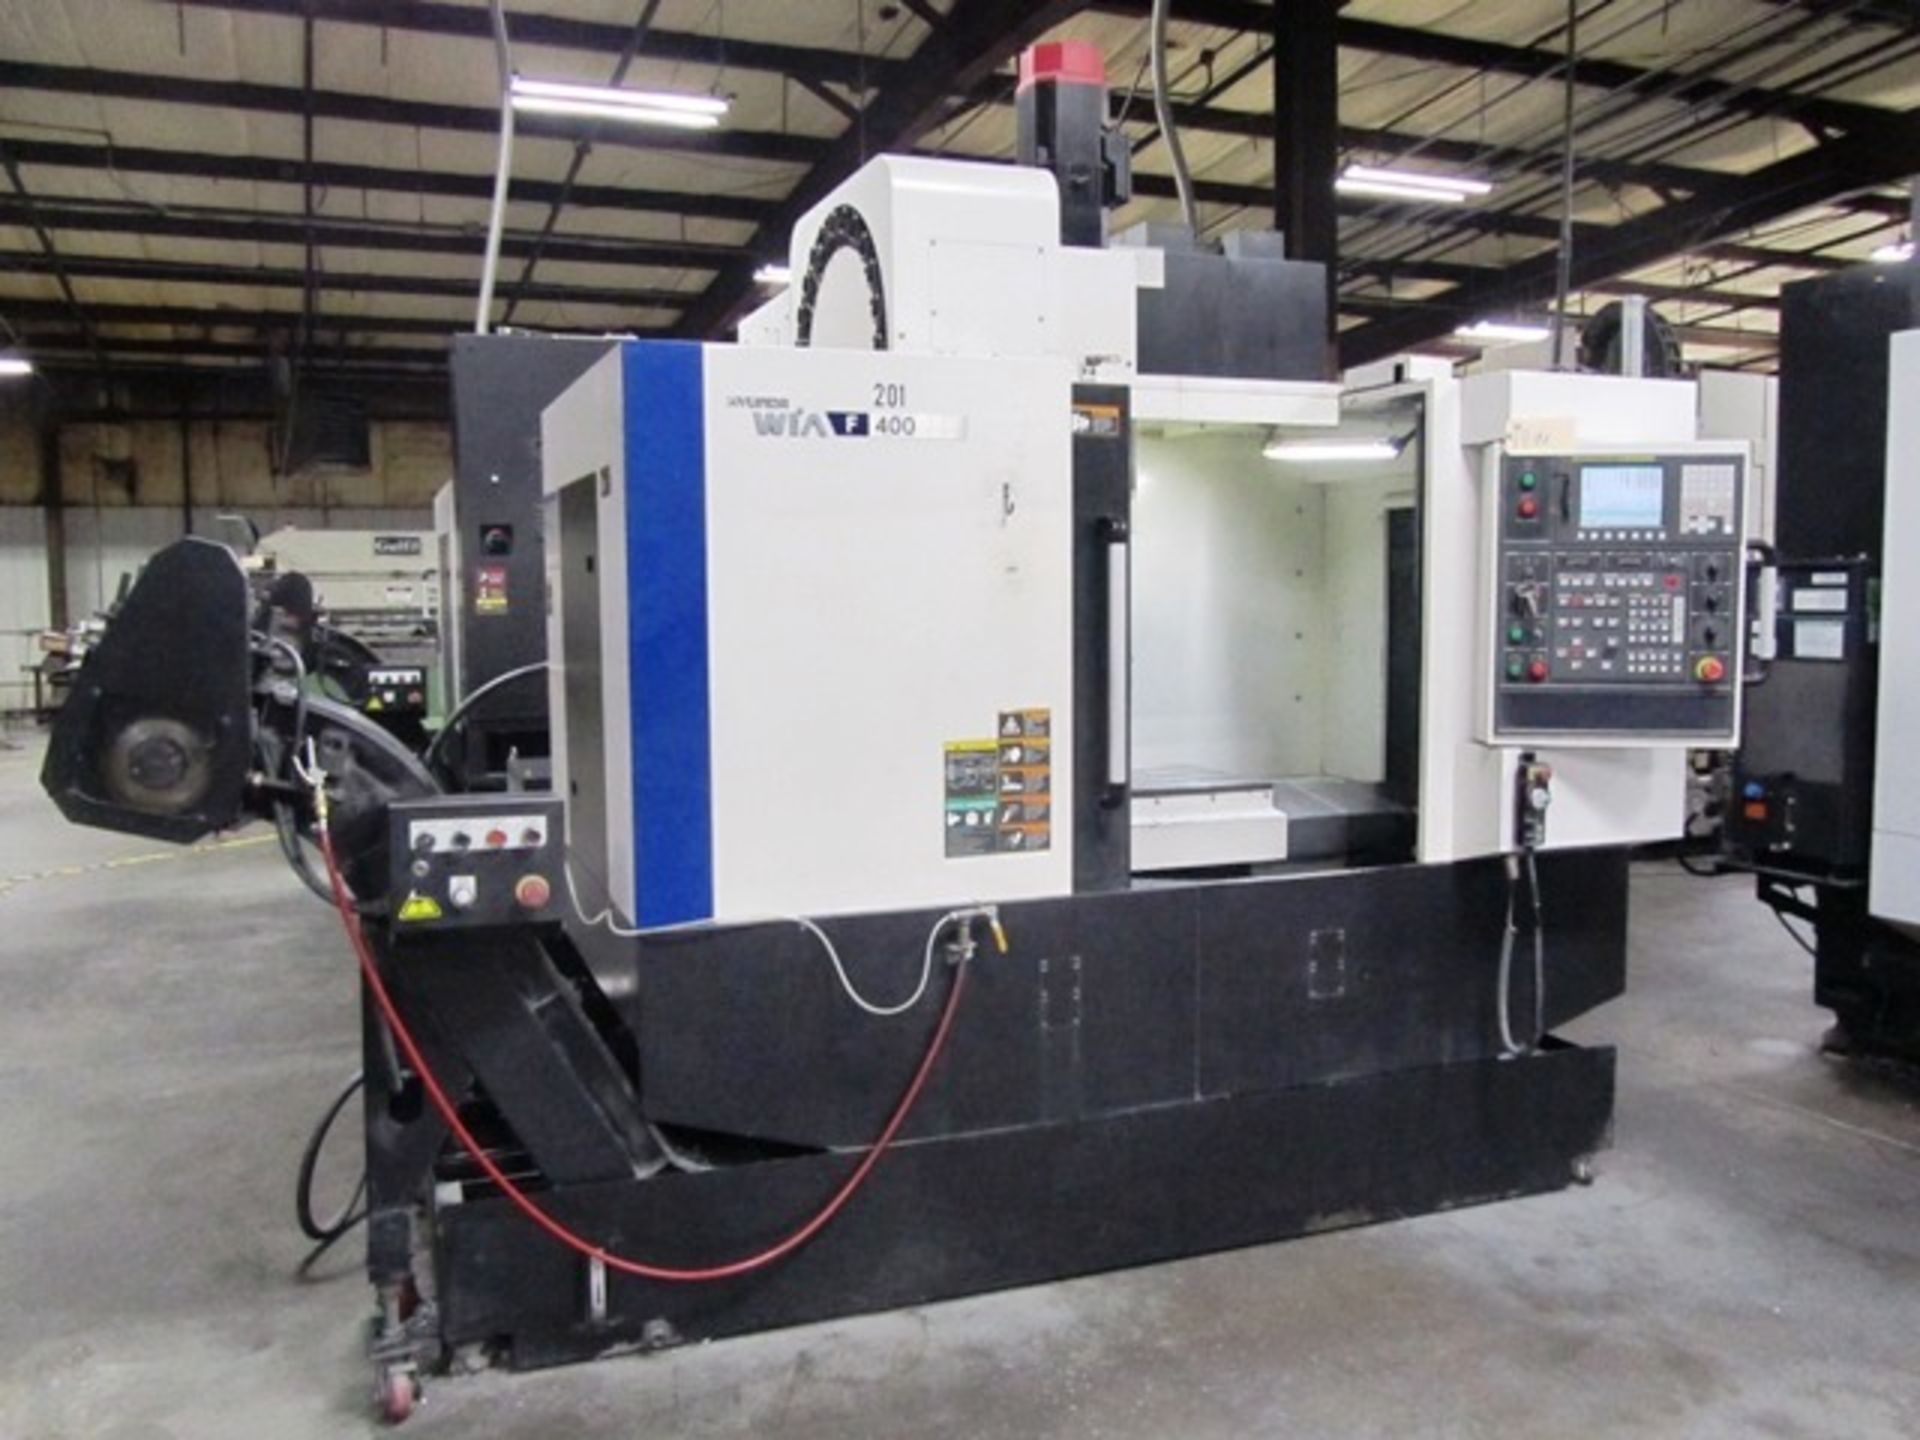 Hyundai WIA F400 CNC Vertical Machining Center with 39'' x 18'' Worktable, #40 Taper Spindles Speeds - Image 5 of 6